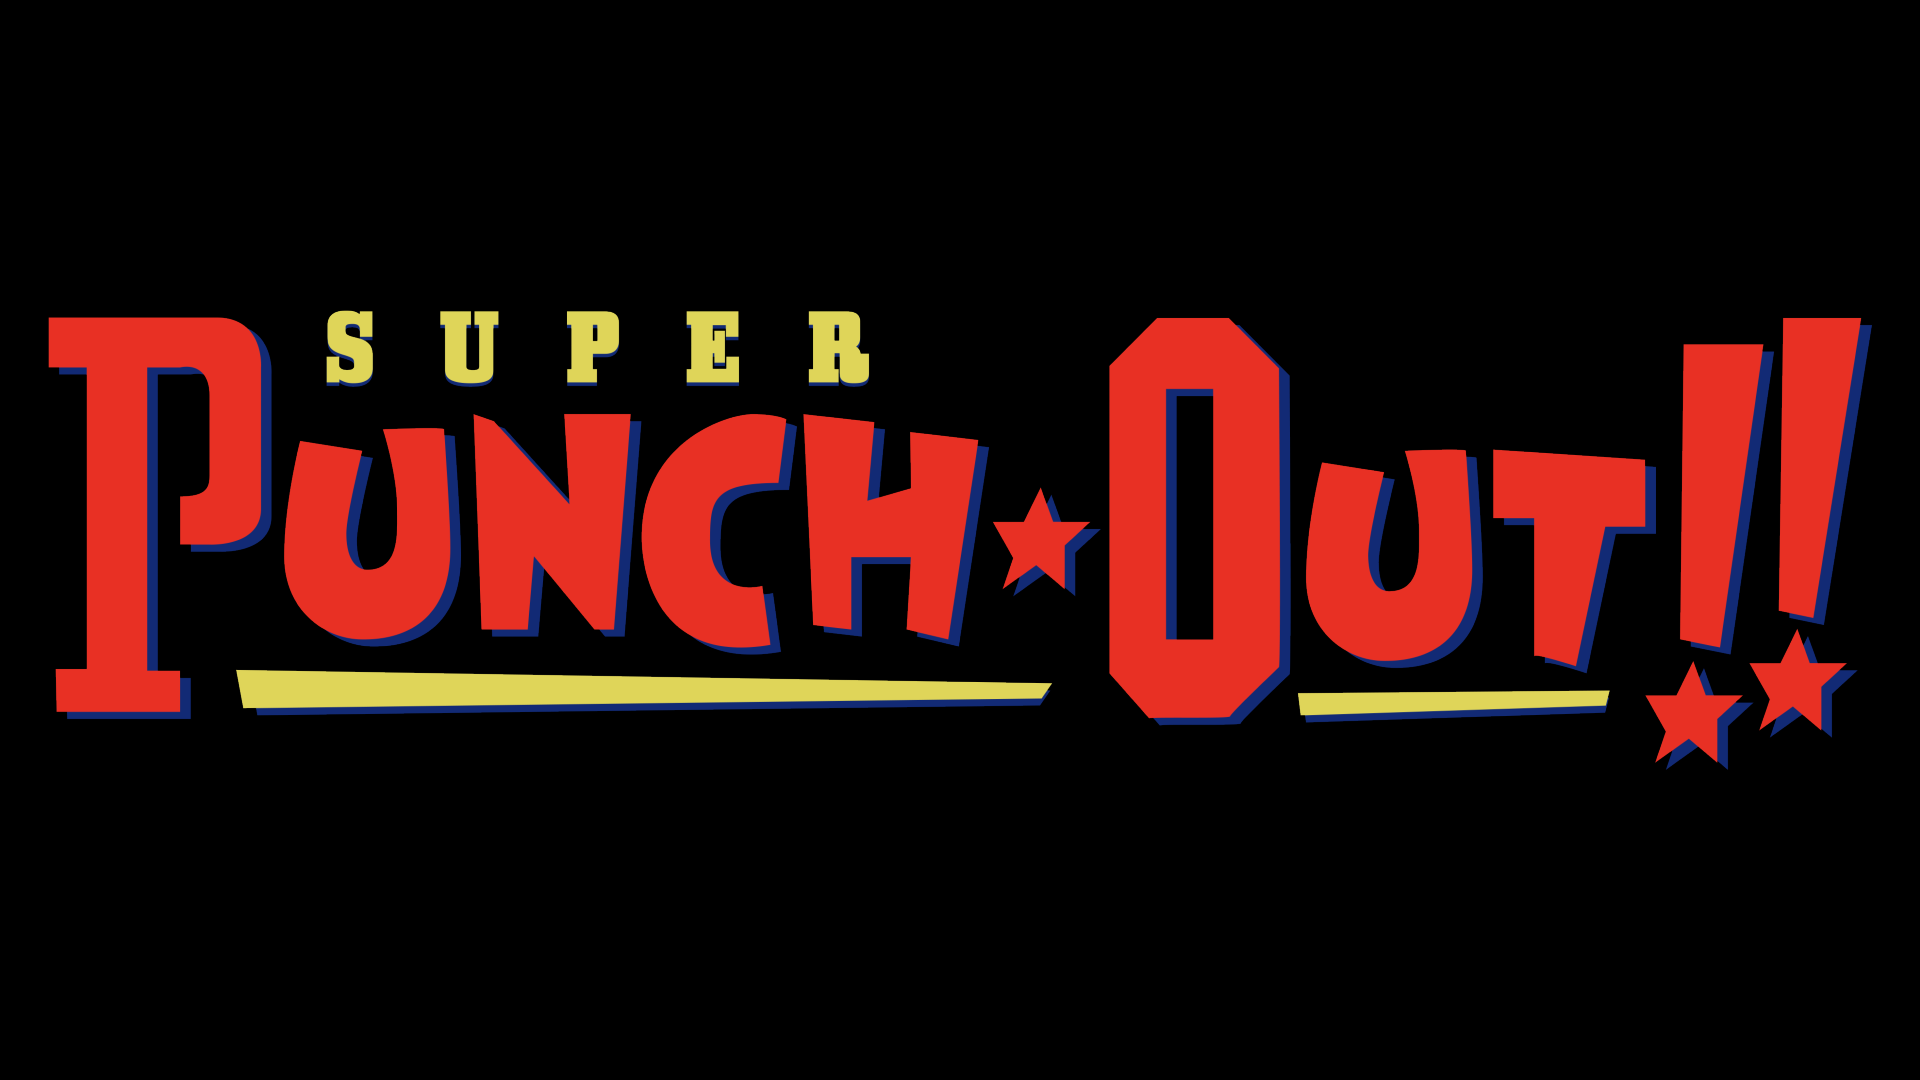 Super Punch-Out!! Logo